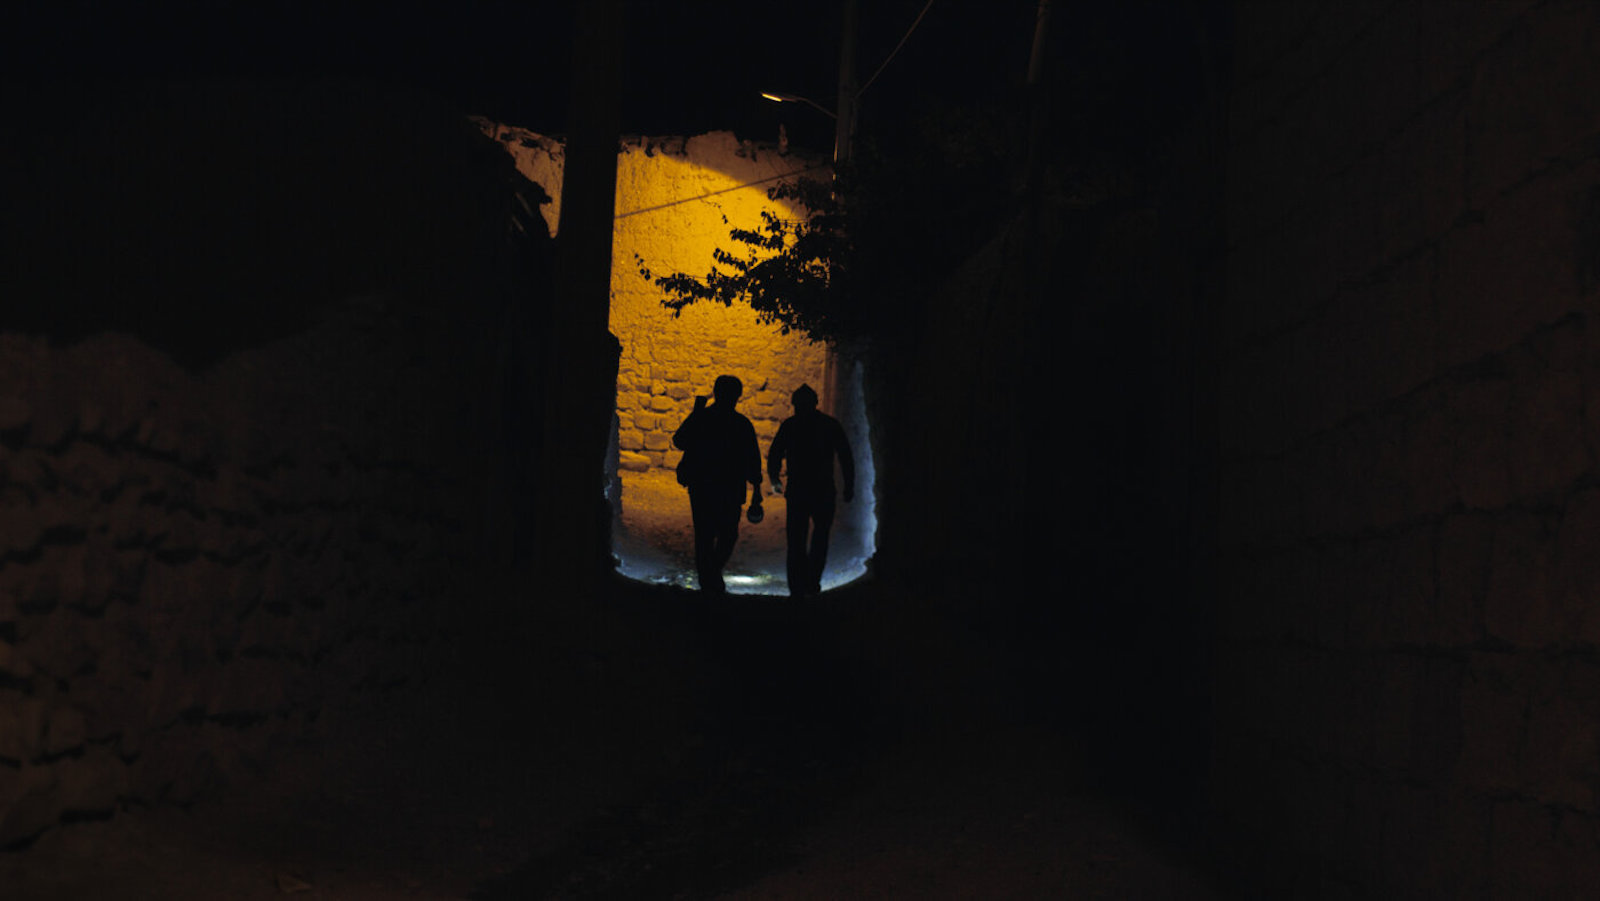 Two people silhouetted in dark nighttime street